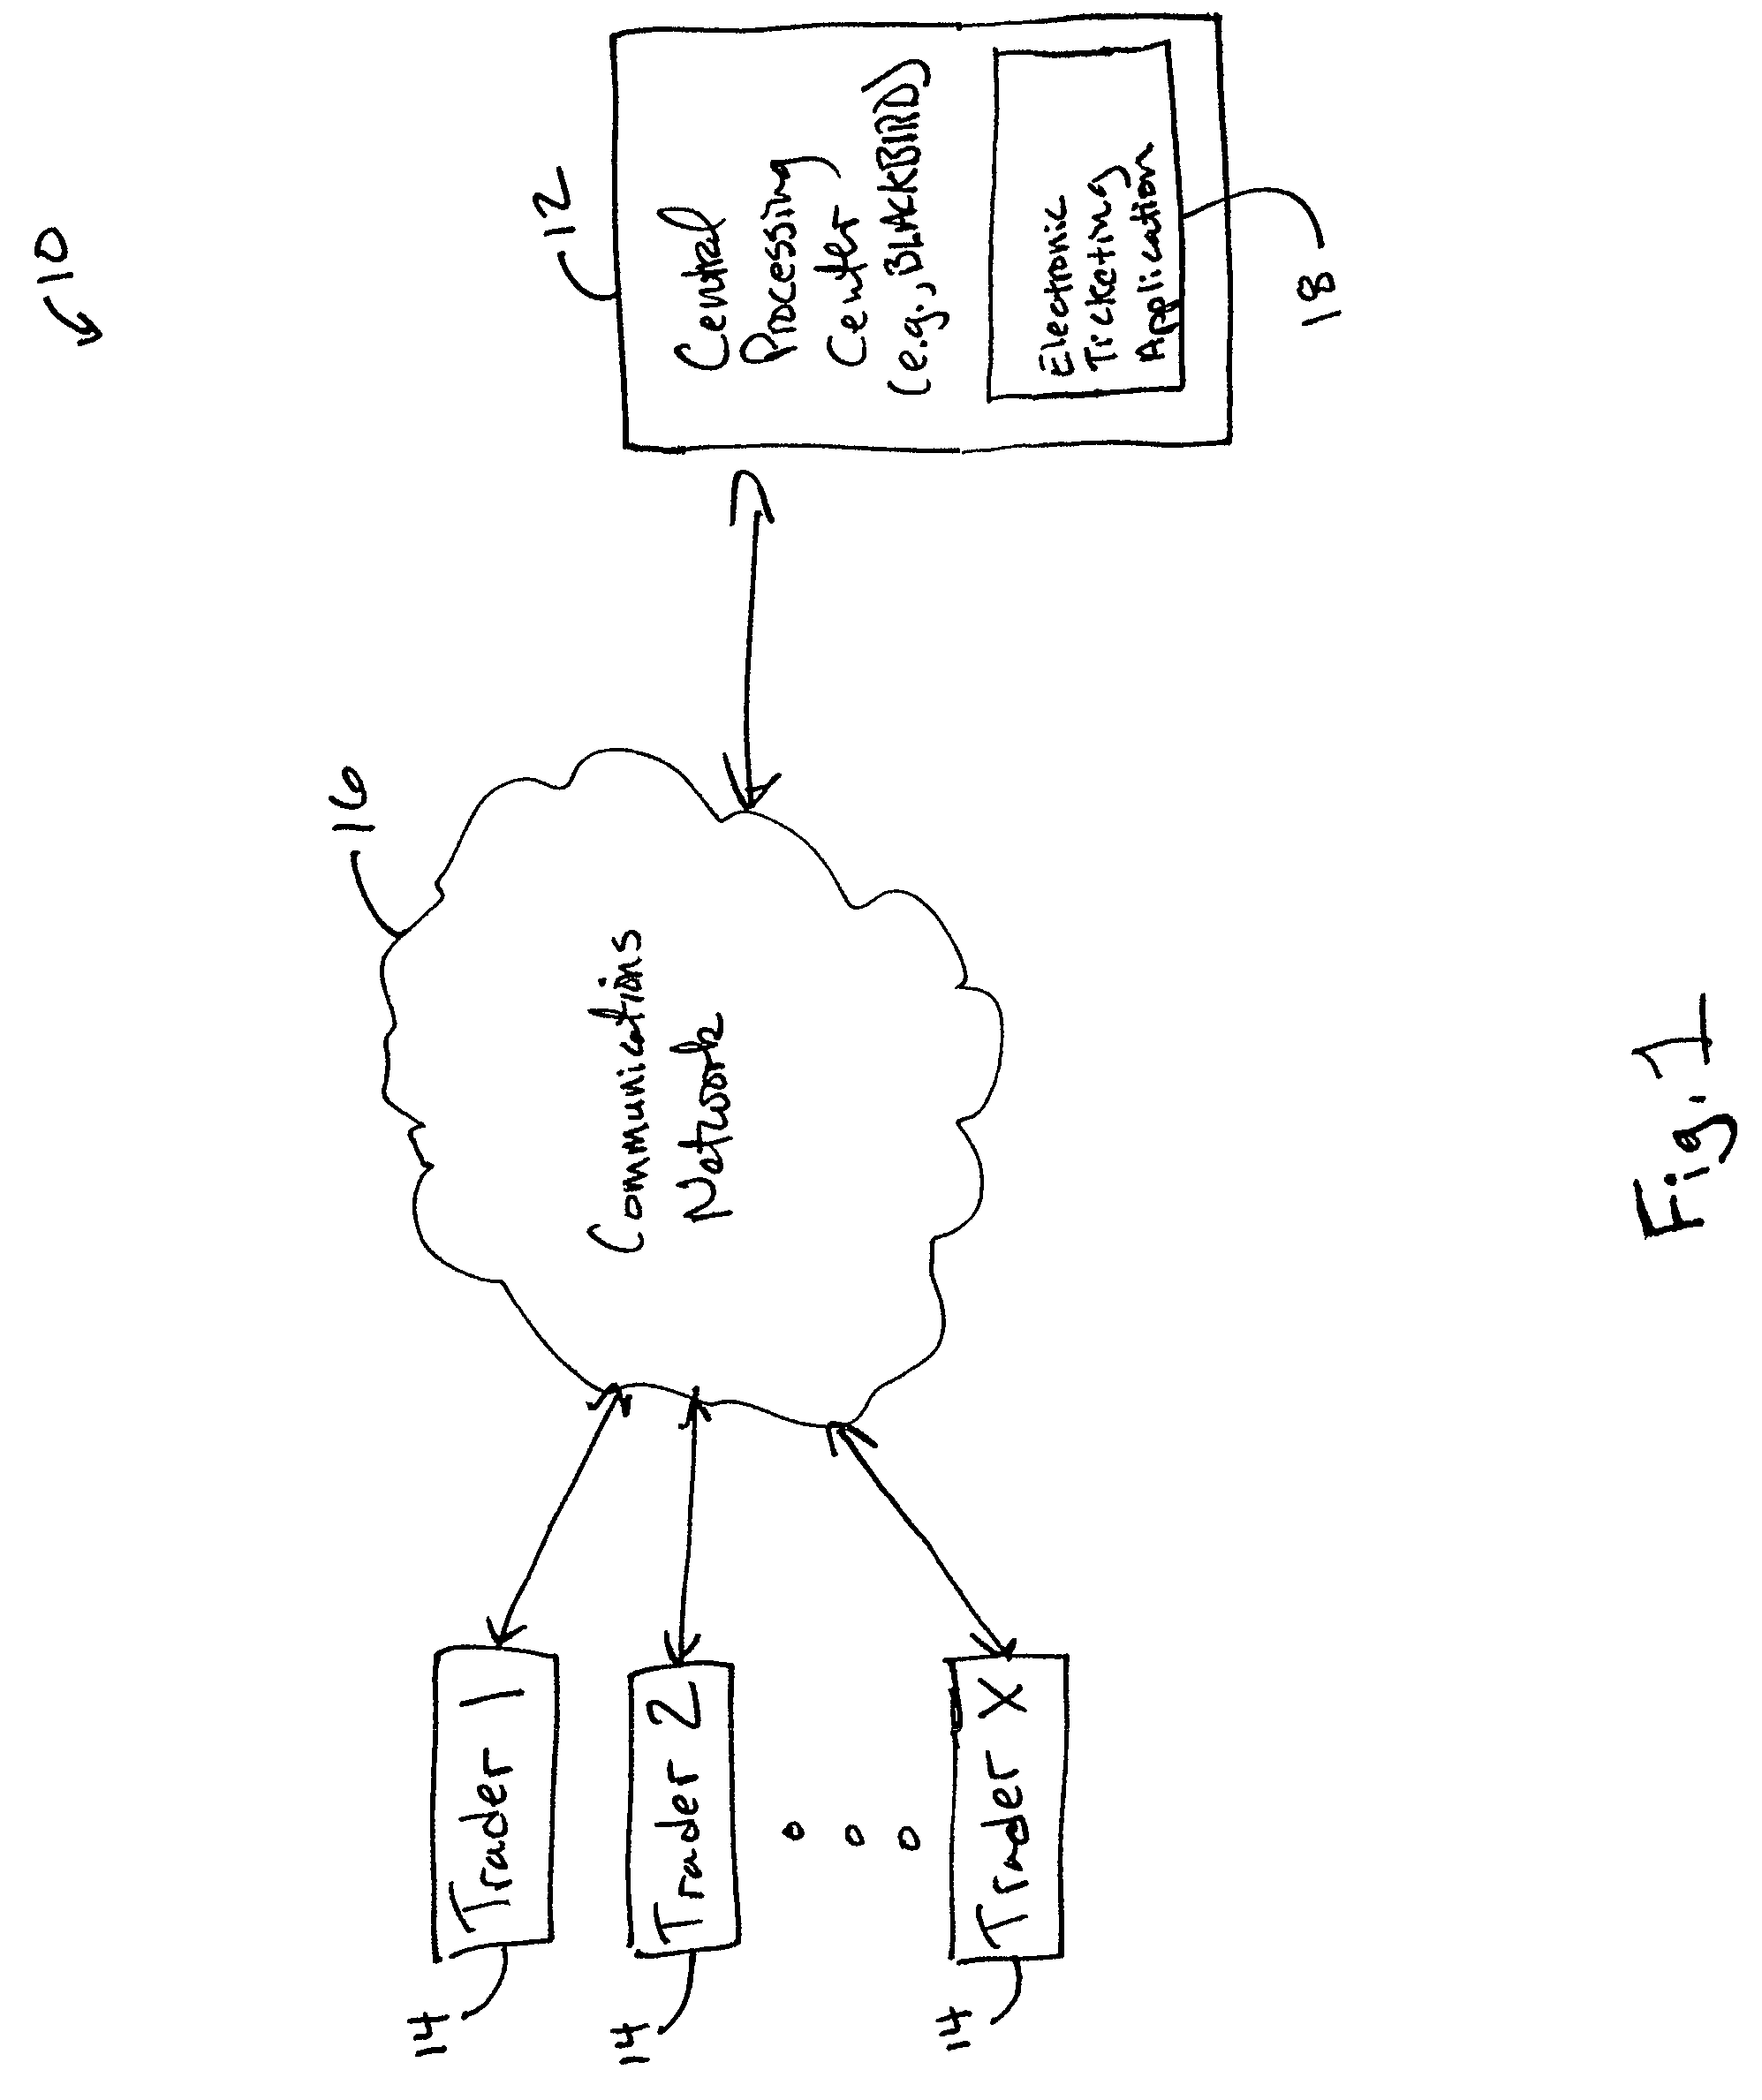 Systems and methods for conducting derivative trades electronically